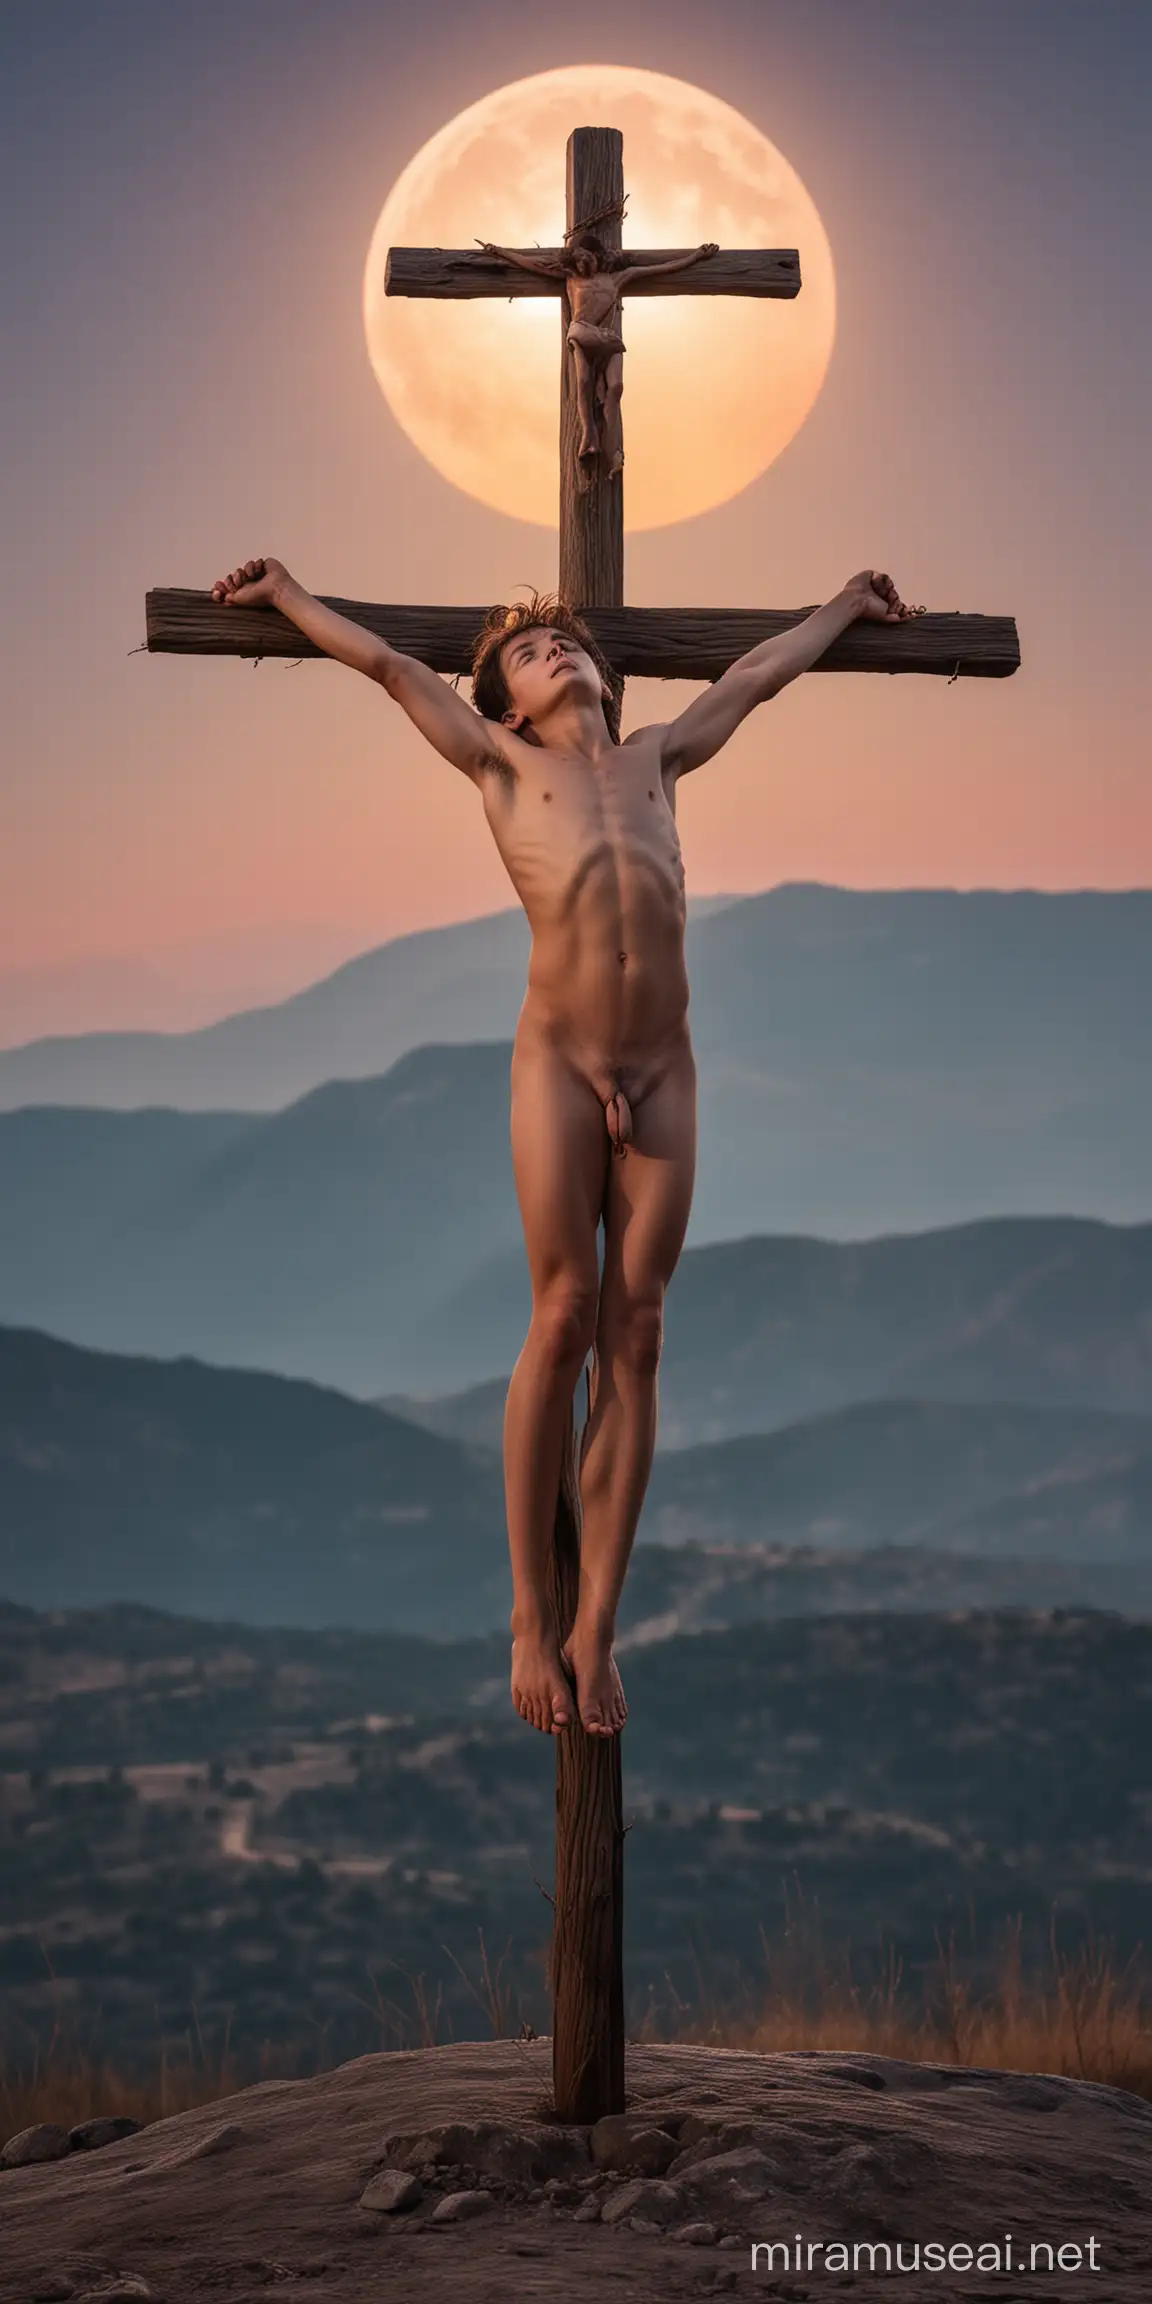 Naked Boy Crucified in Mountainous Landscape During Solar Eclipse